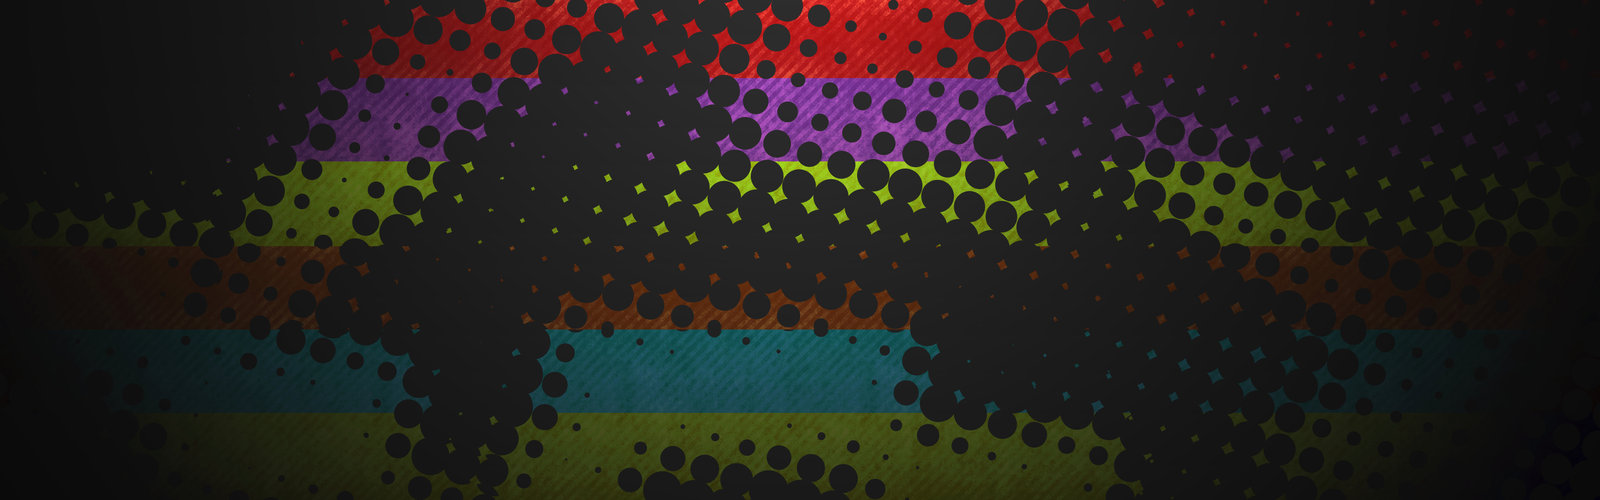 Multi Colour Spots Wallpaper by Its Martindale on DeviantArt